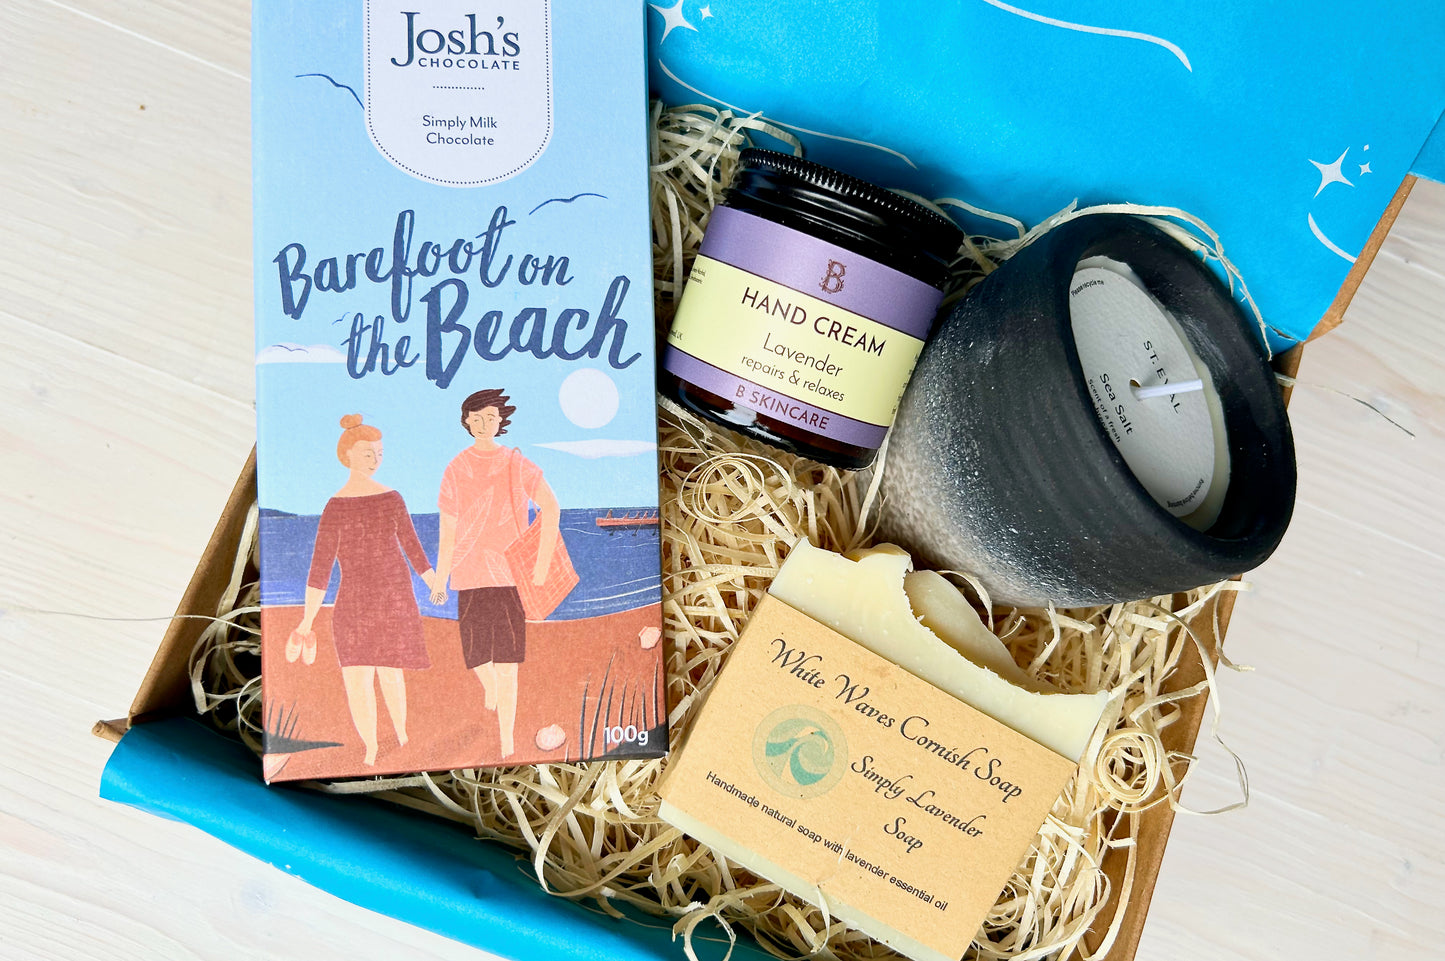 Luxury Cornish Gift Box - Cornish Gifts by Post - With ceramic candle, natural hand cream, Cornish soap and artisan chcoolate